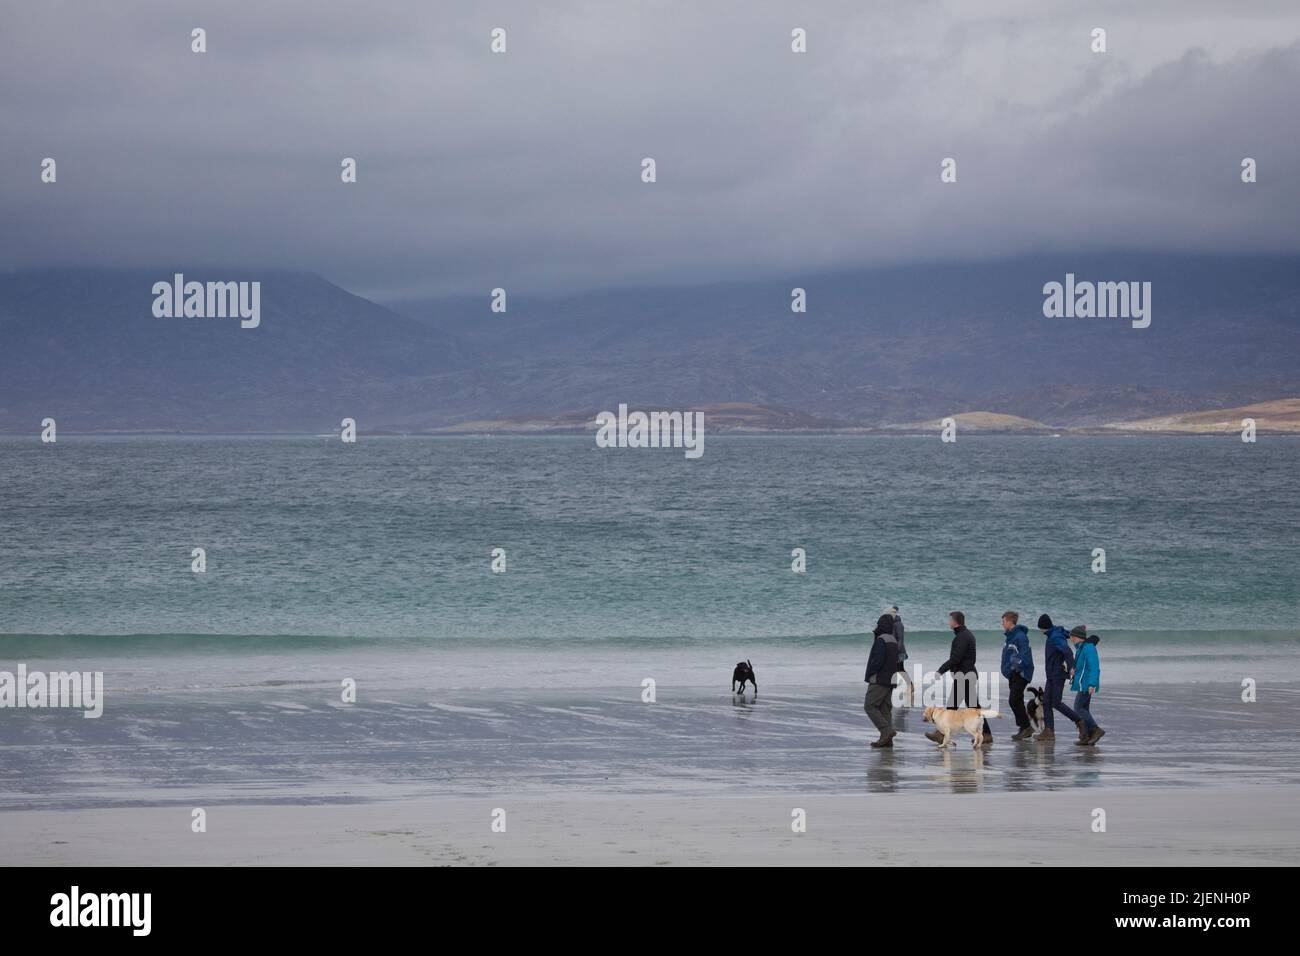 People walking their dogs at Luskentyre beach on the Isle of Harris, Outer Hebrides, Scotland, United Kingdom Stock Photo